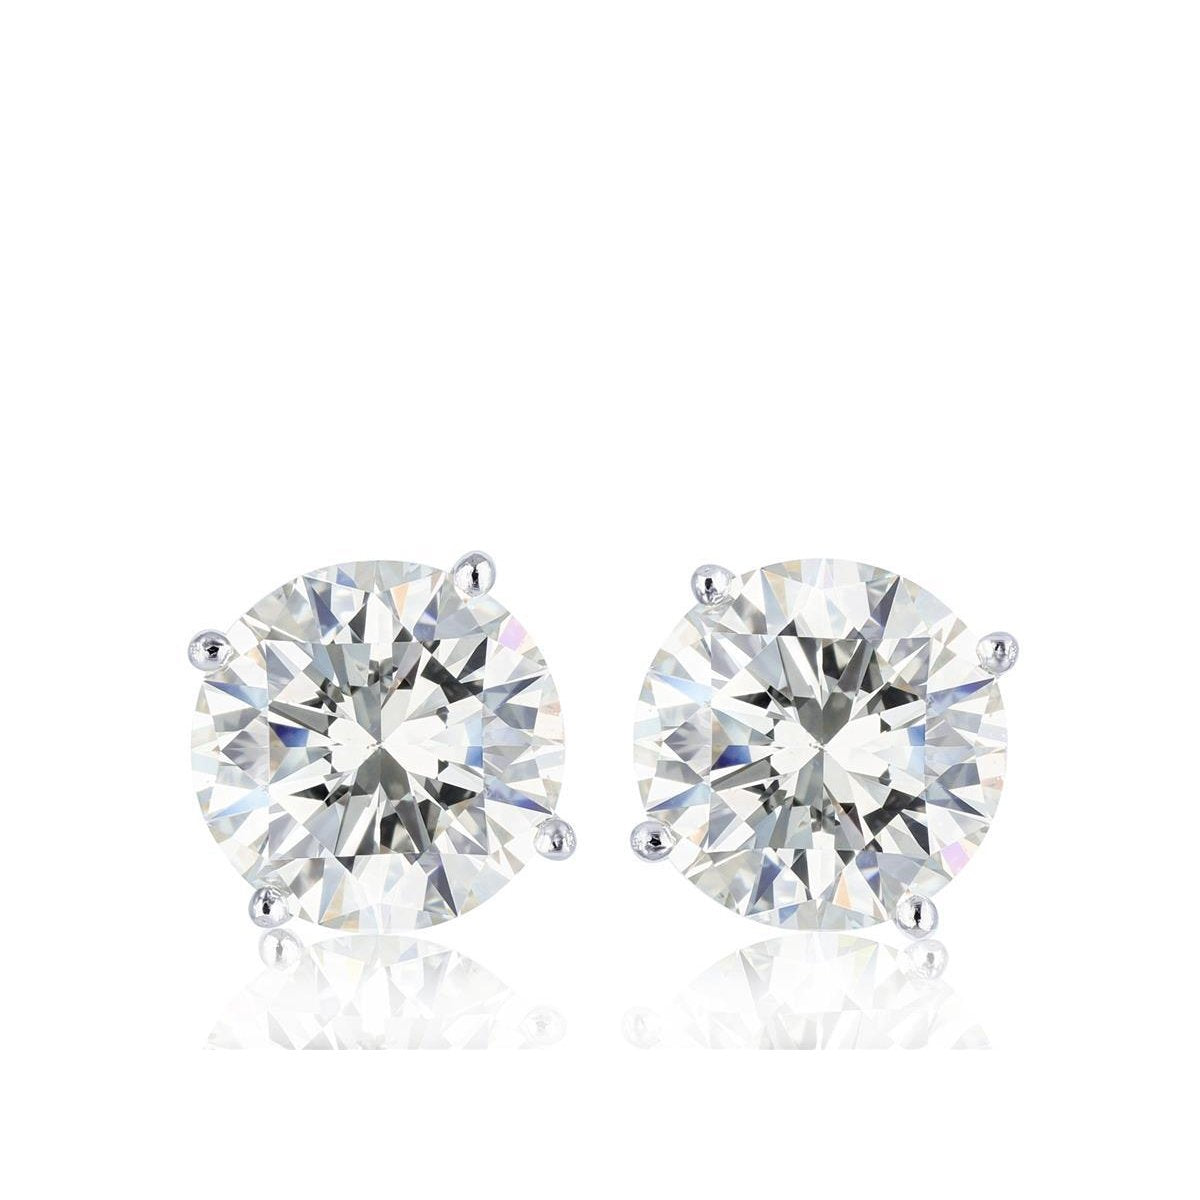 Solitaire Round Cut 2 Carats Diamond Stud Earring White Gold 14K - Stud Earrings-harrychadent.ca